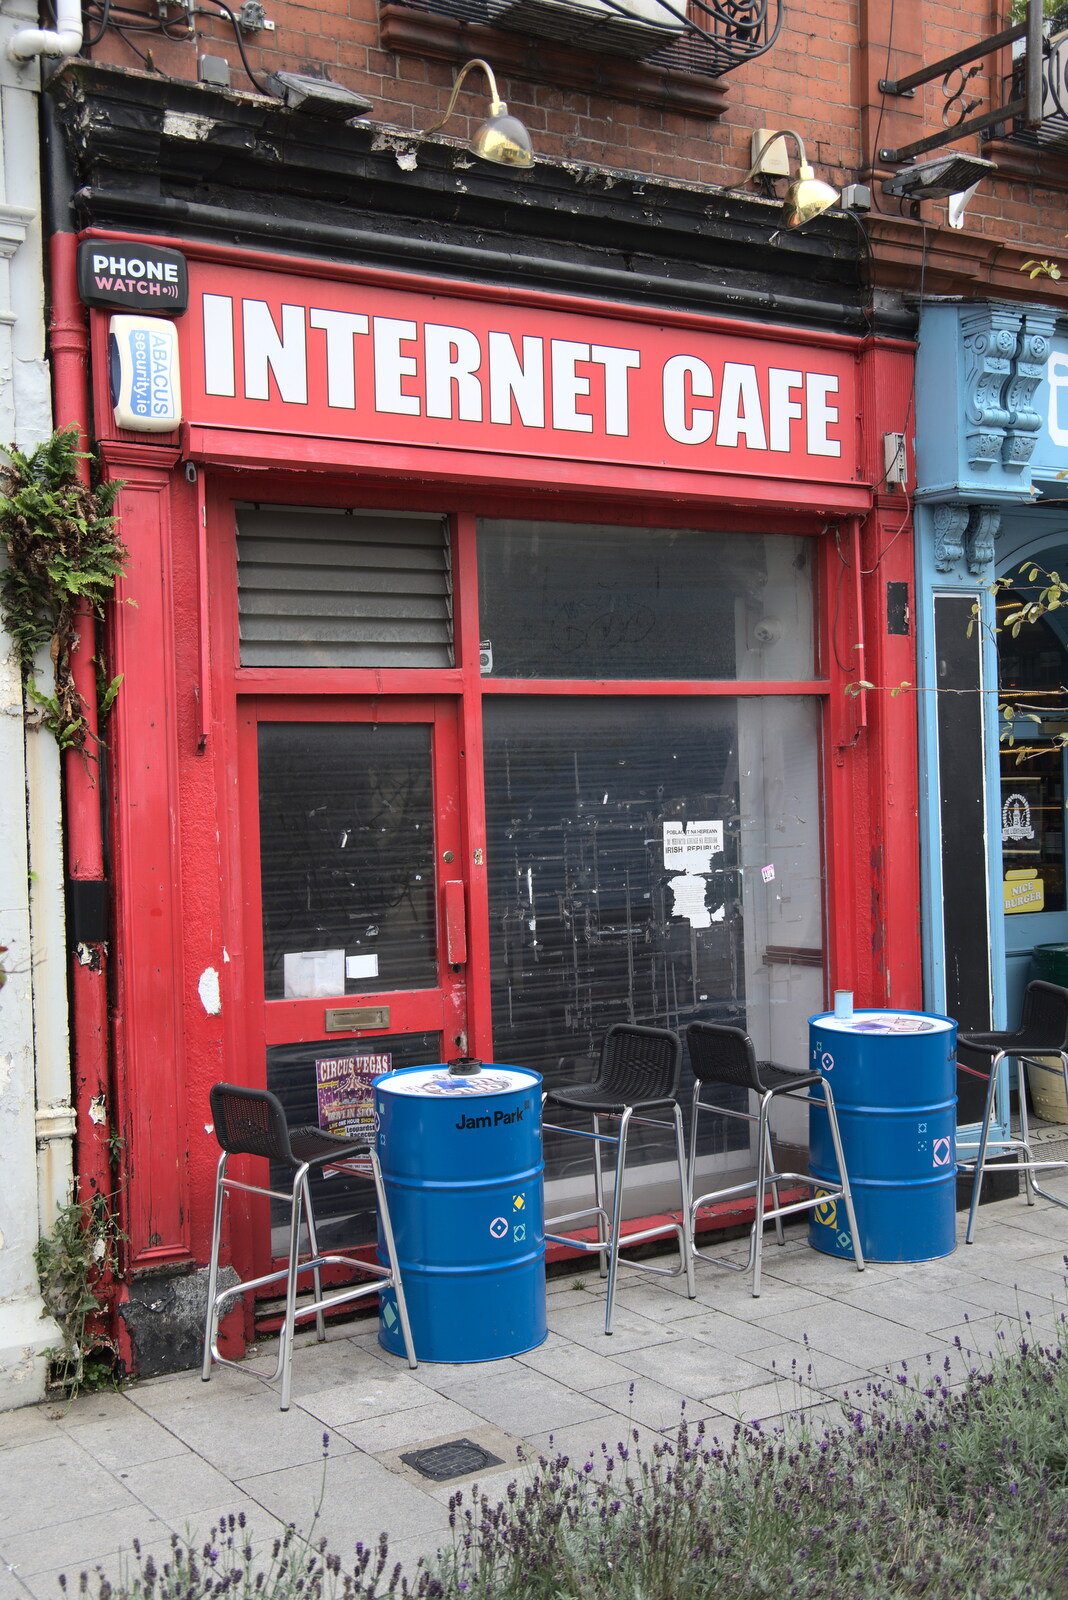 A relic of the past: an Internet Café from Manorhamilton and the Street Art of Dún Laoghaire, Ireland - 15th August 2021